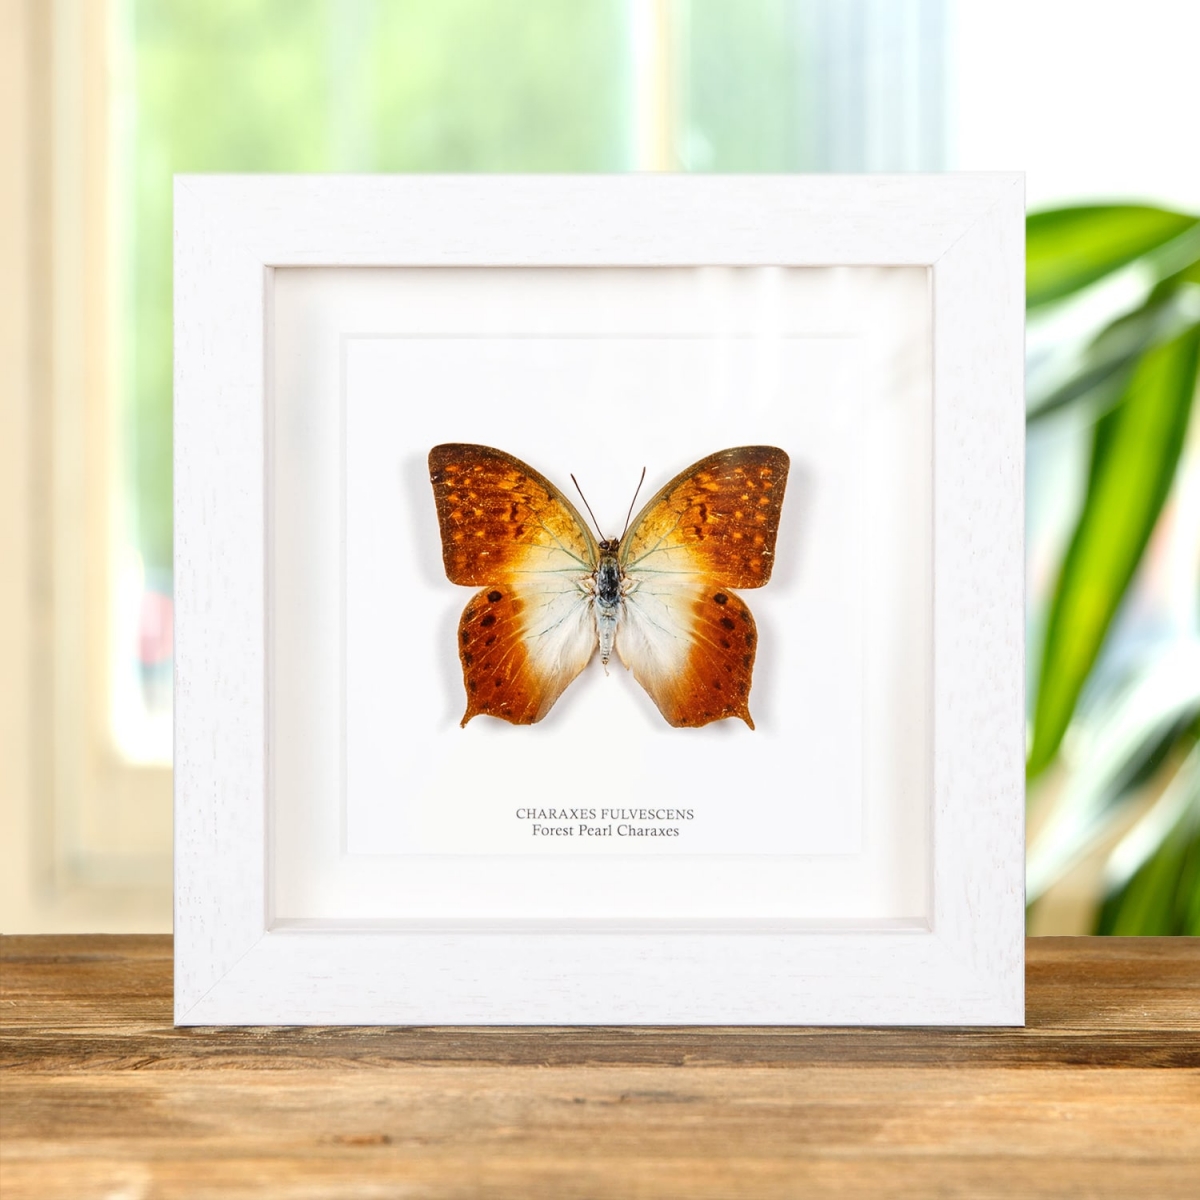 Forest Pearl Charaxes In Box Frame (Charaxes fulvescens)